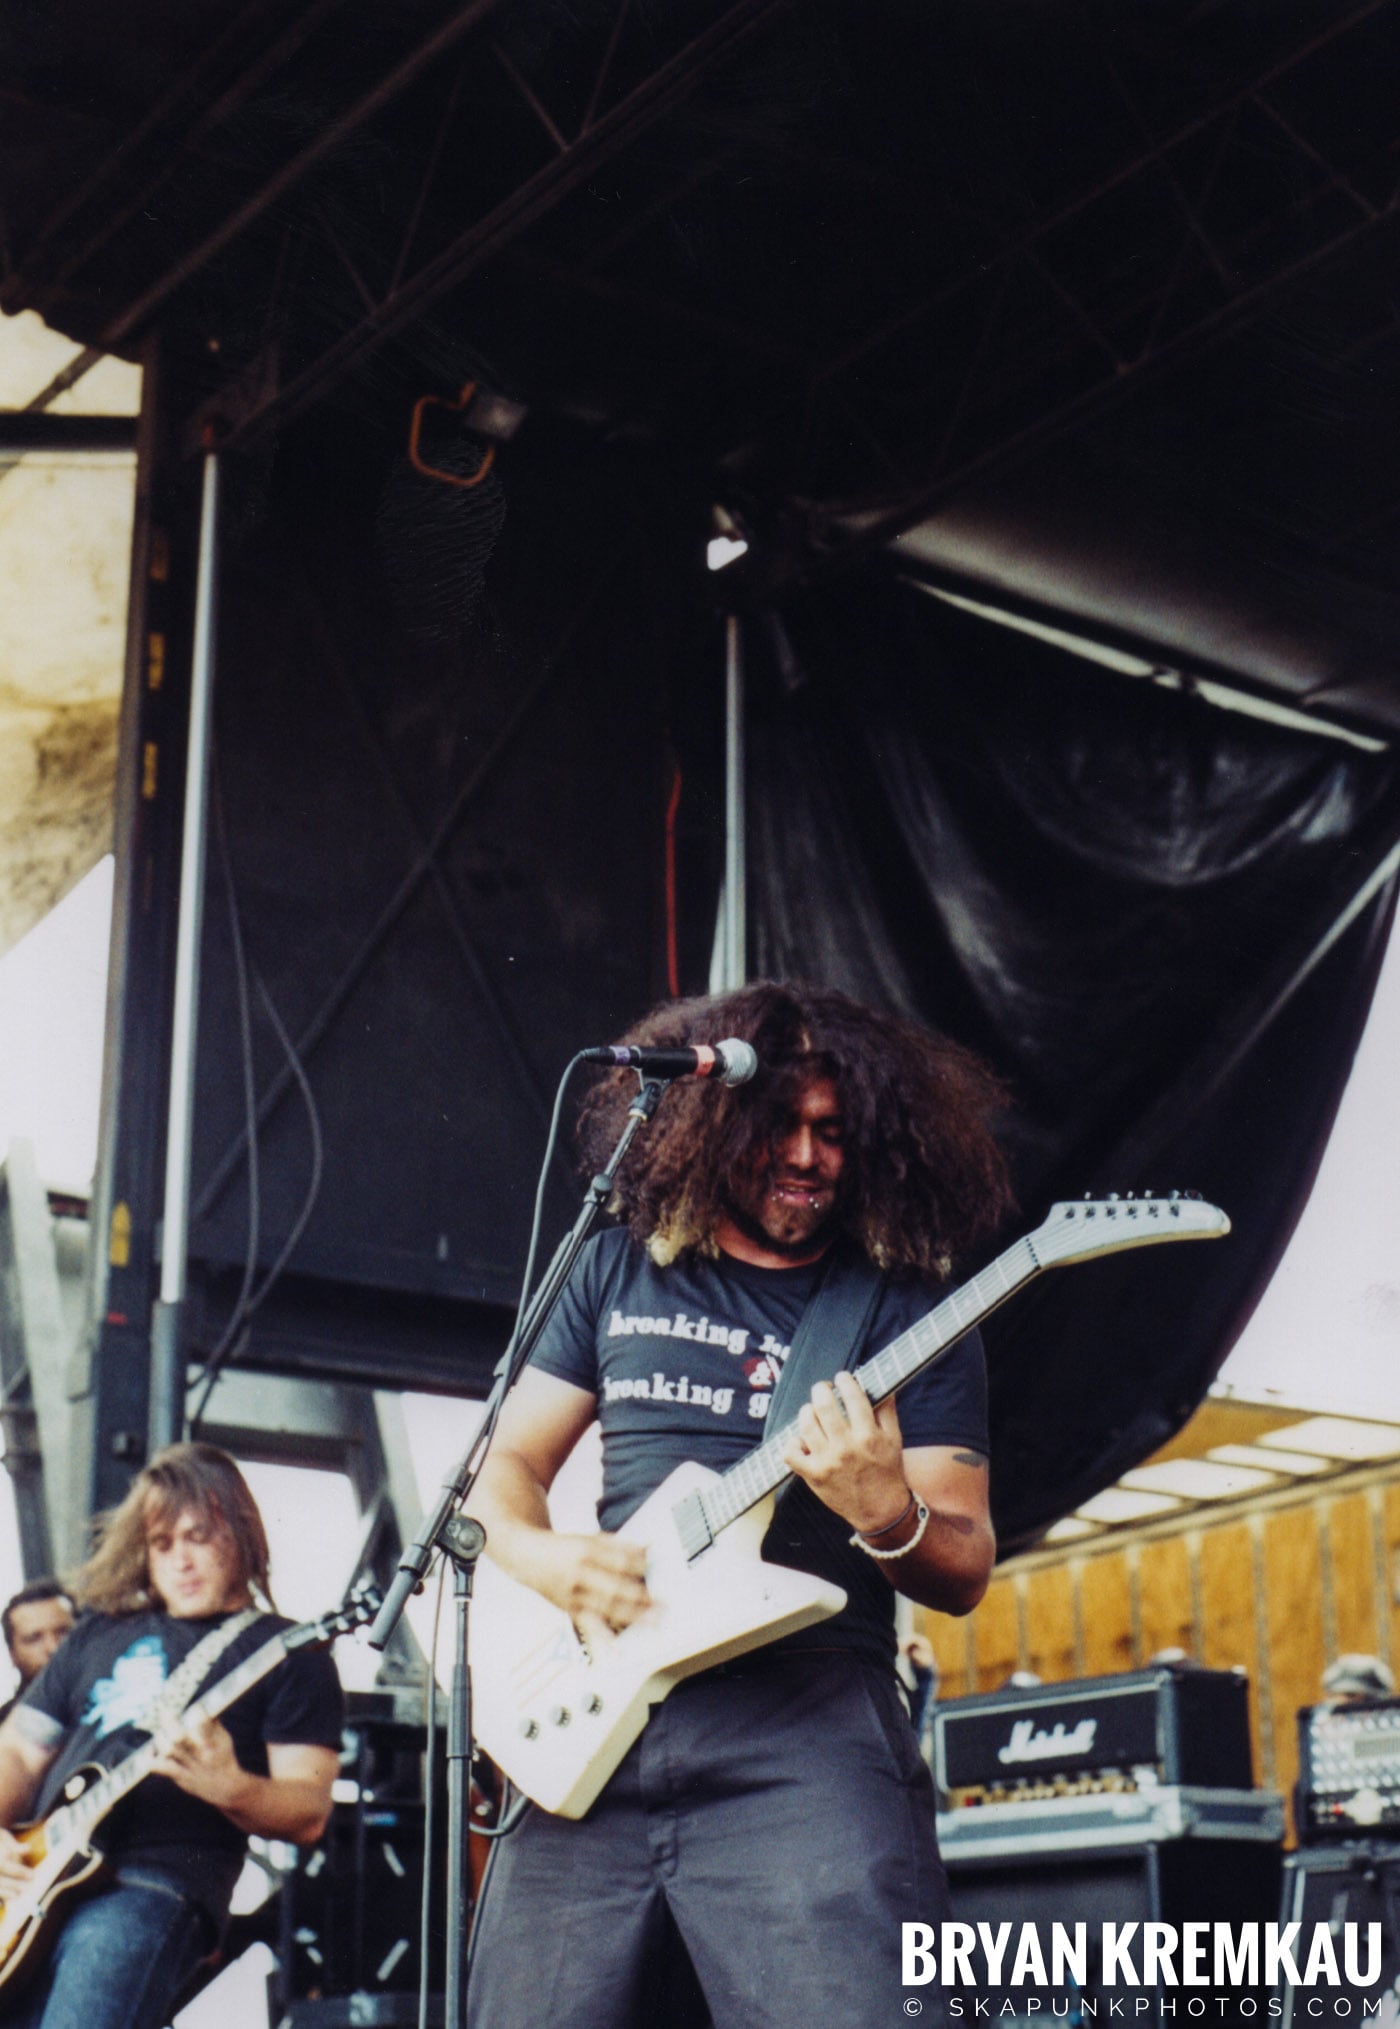 Coheed and Cambria @ Vans Warped Tour, Randall's Island, NYC - 8.7.04 (8)